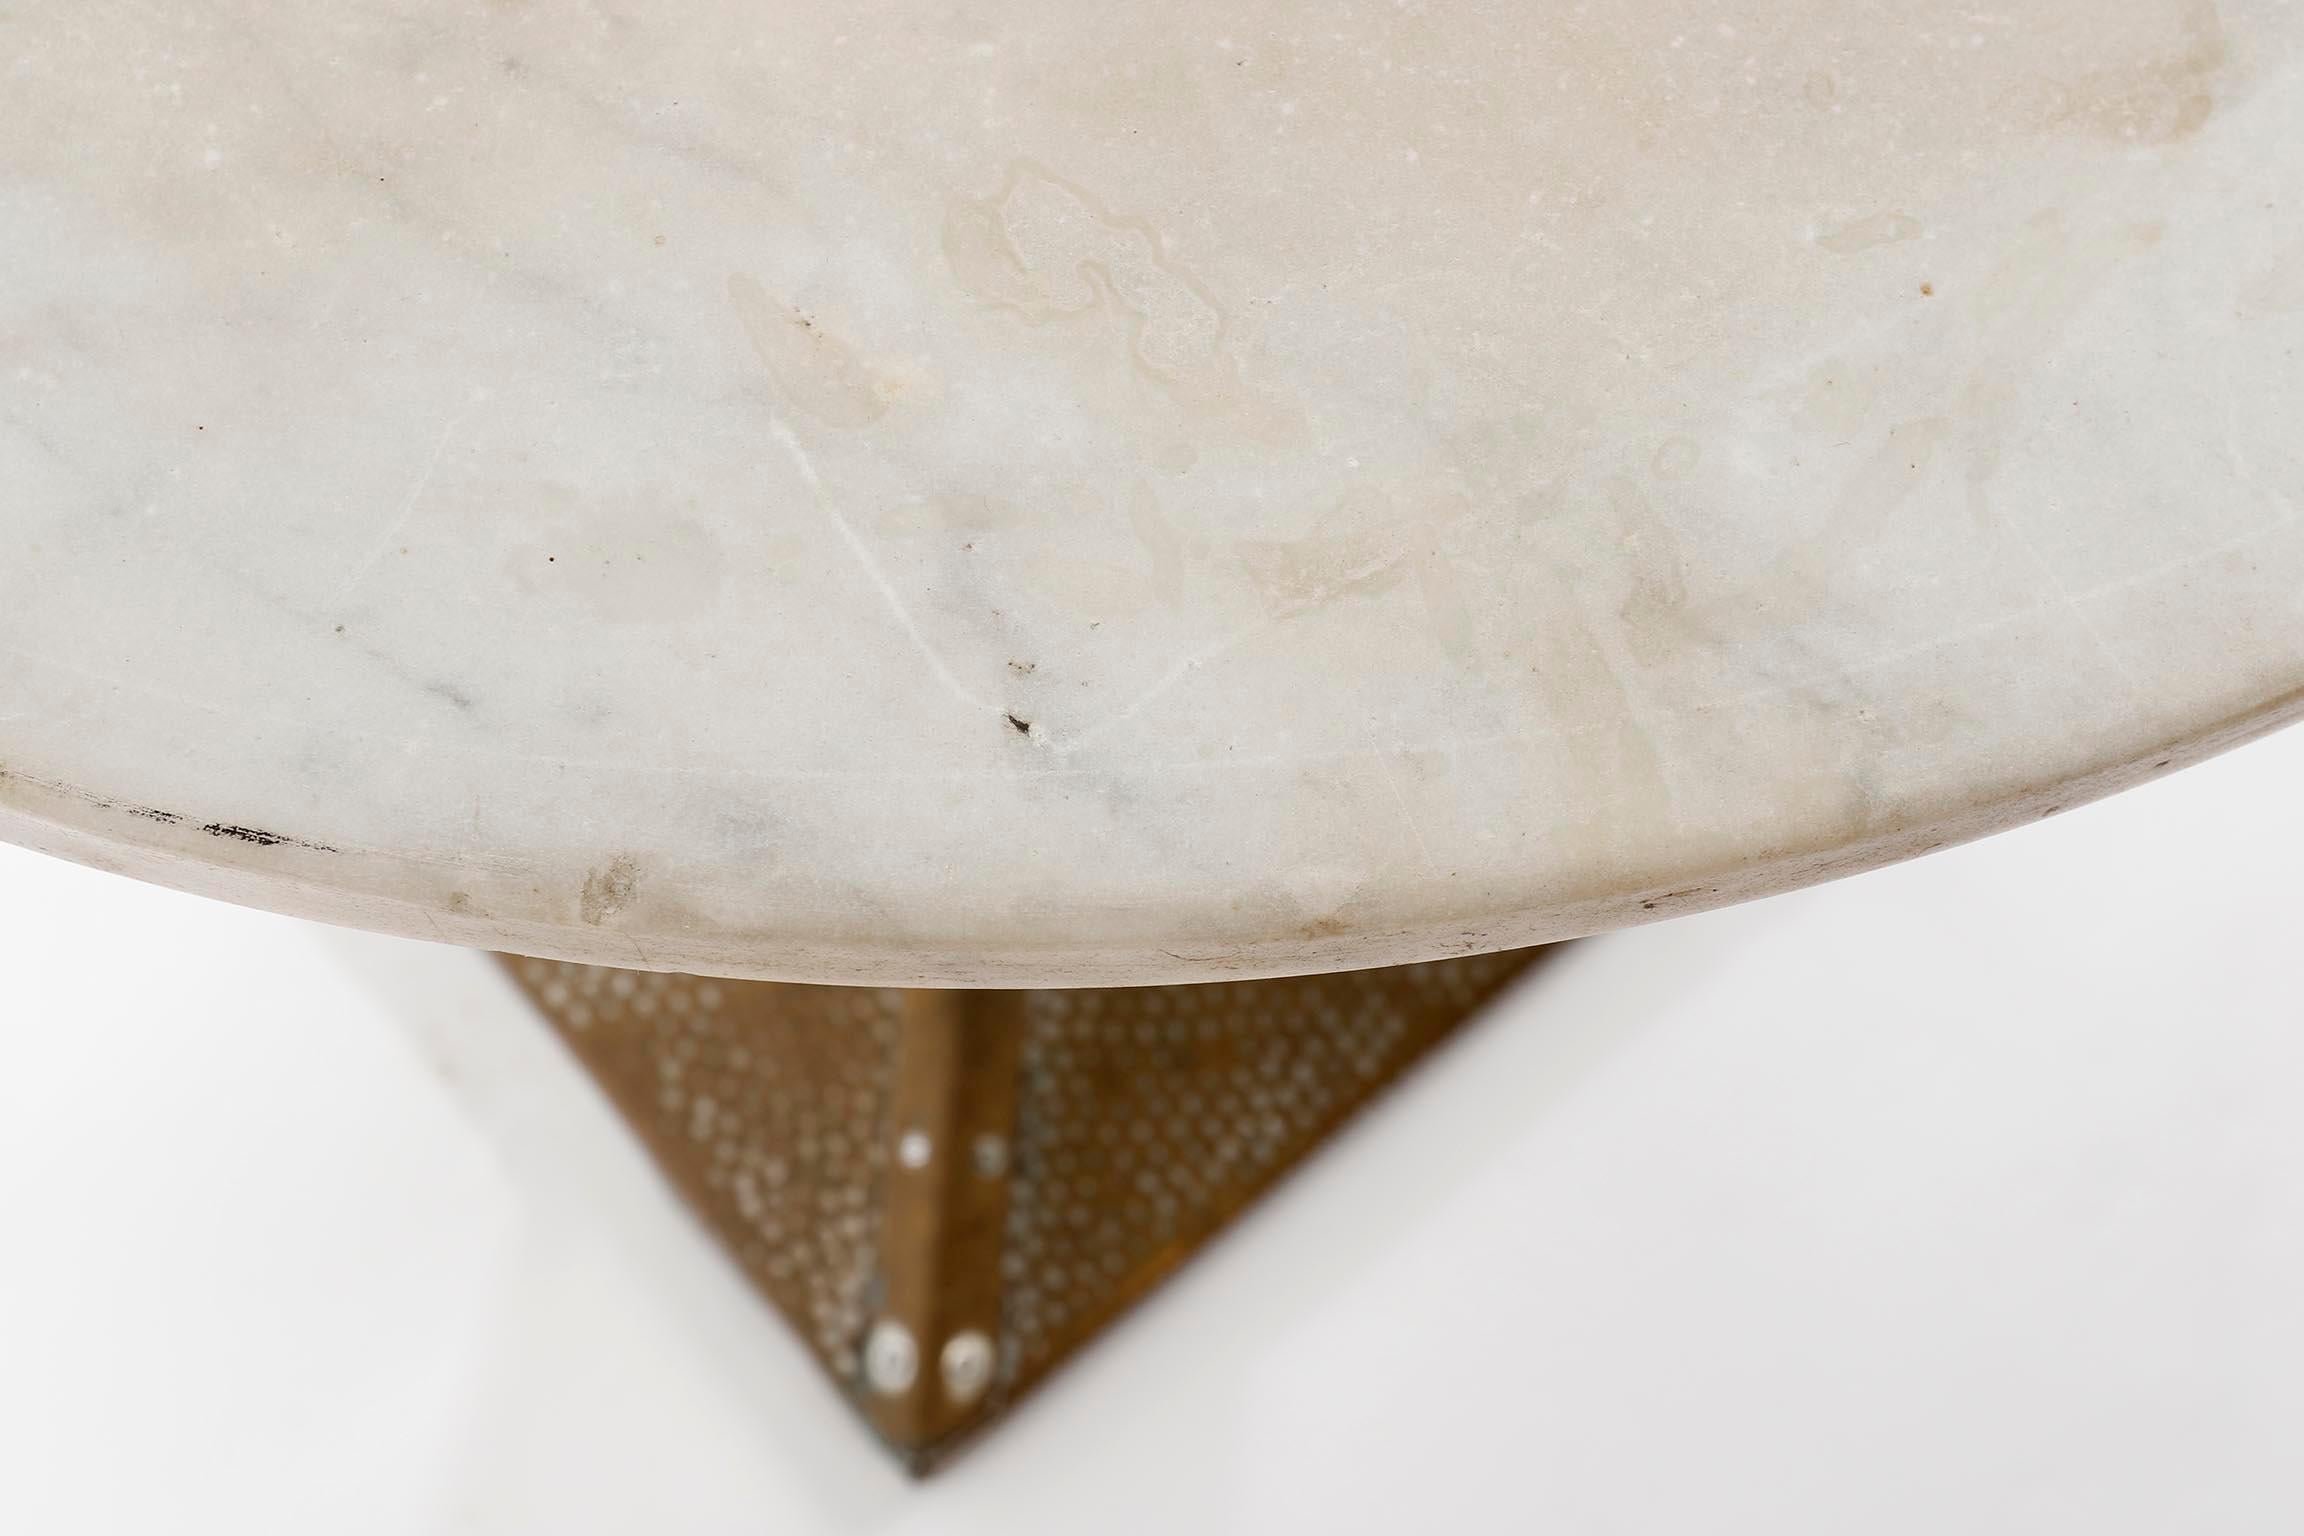 Art Deco Pedestal Table, Marble Patinated Hammered Nickeled Brass, Austria, 1910 For Sale 2